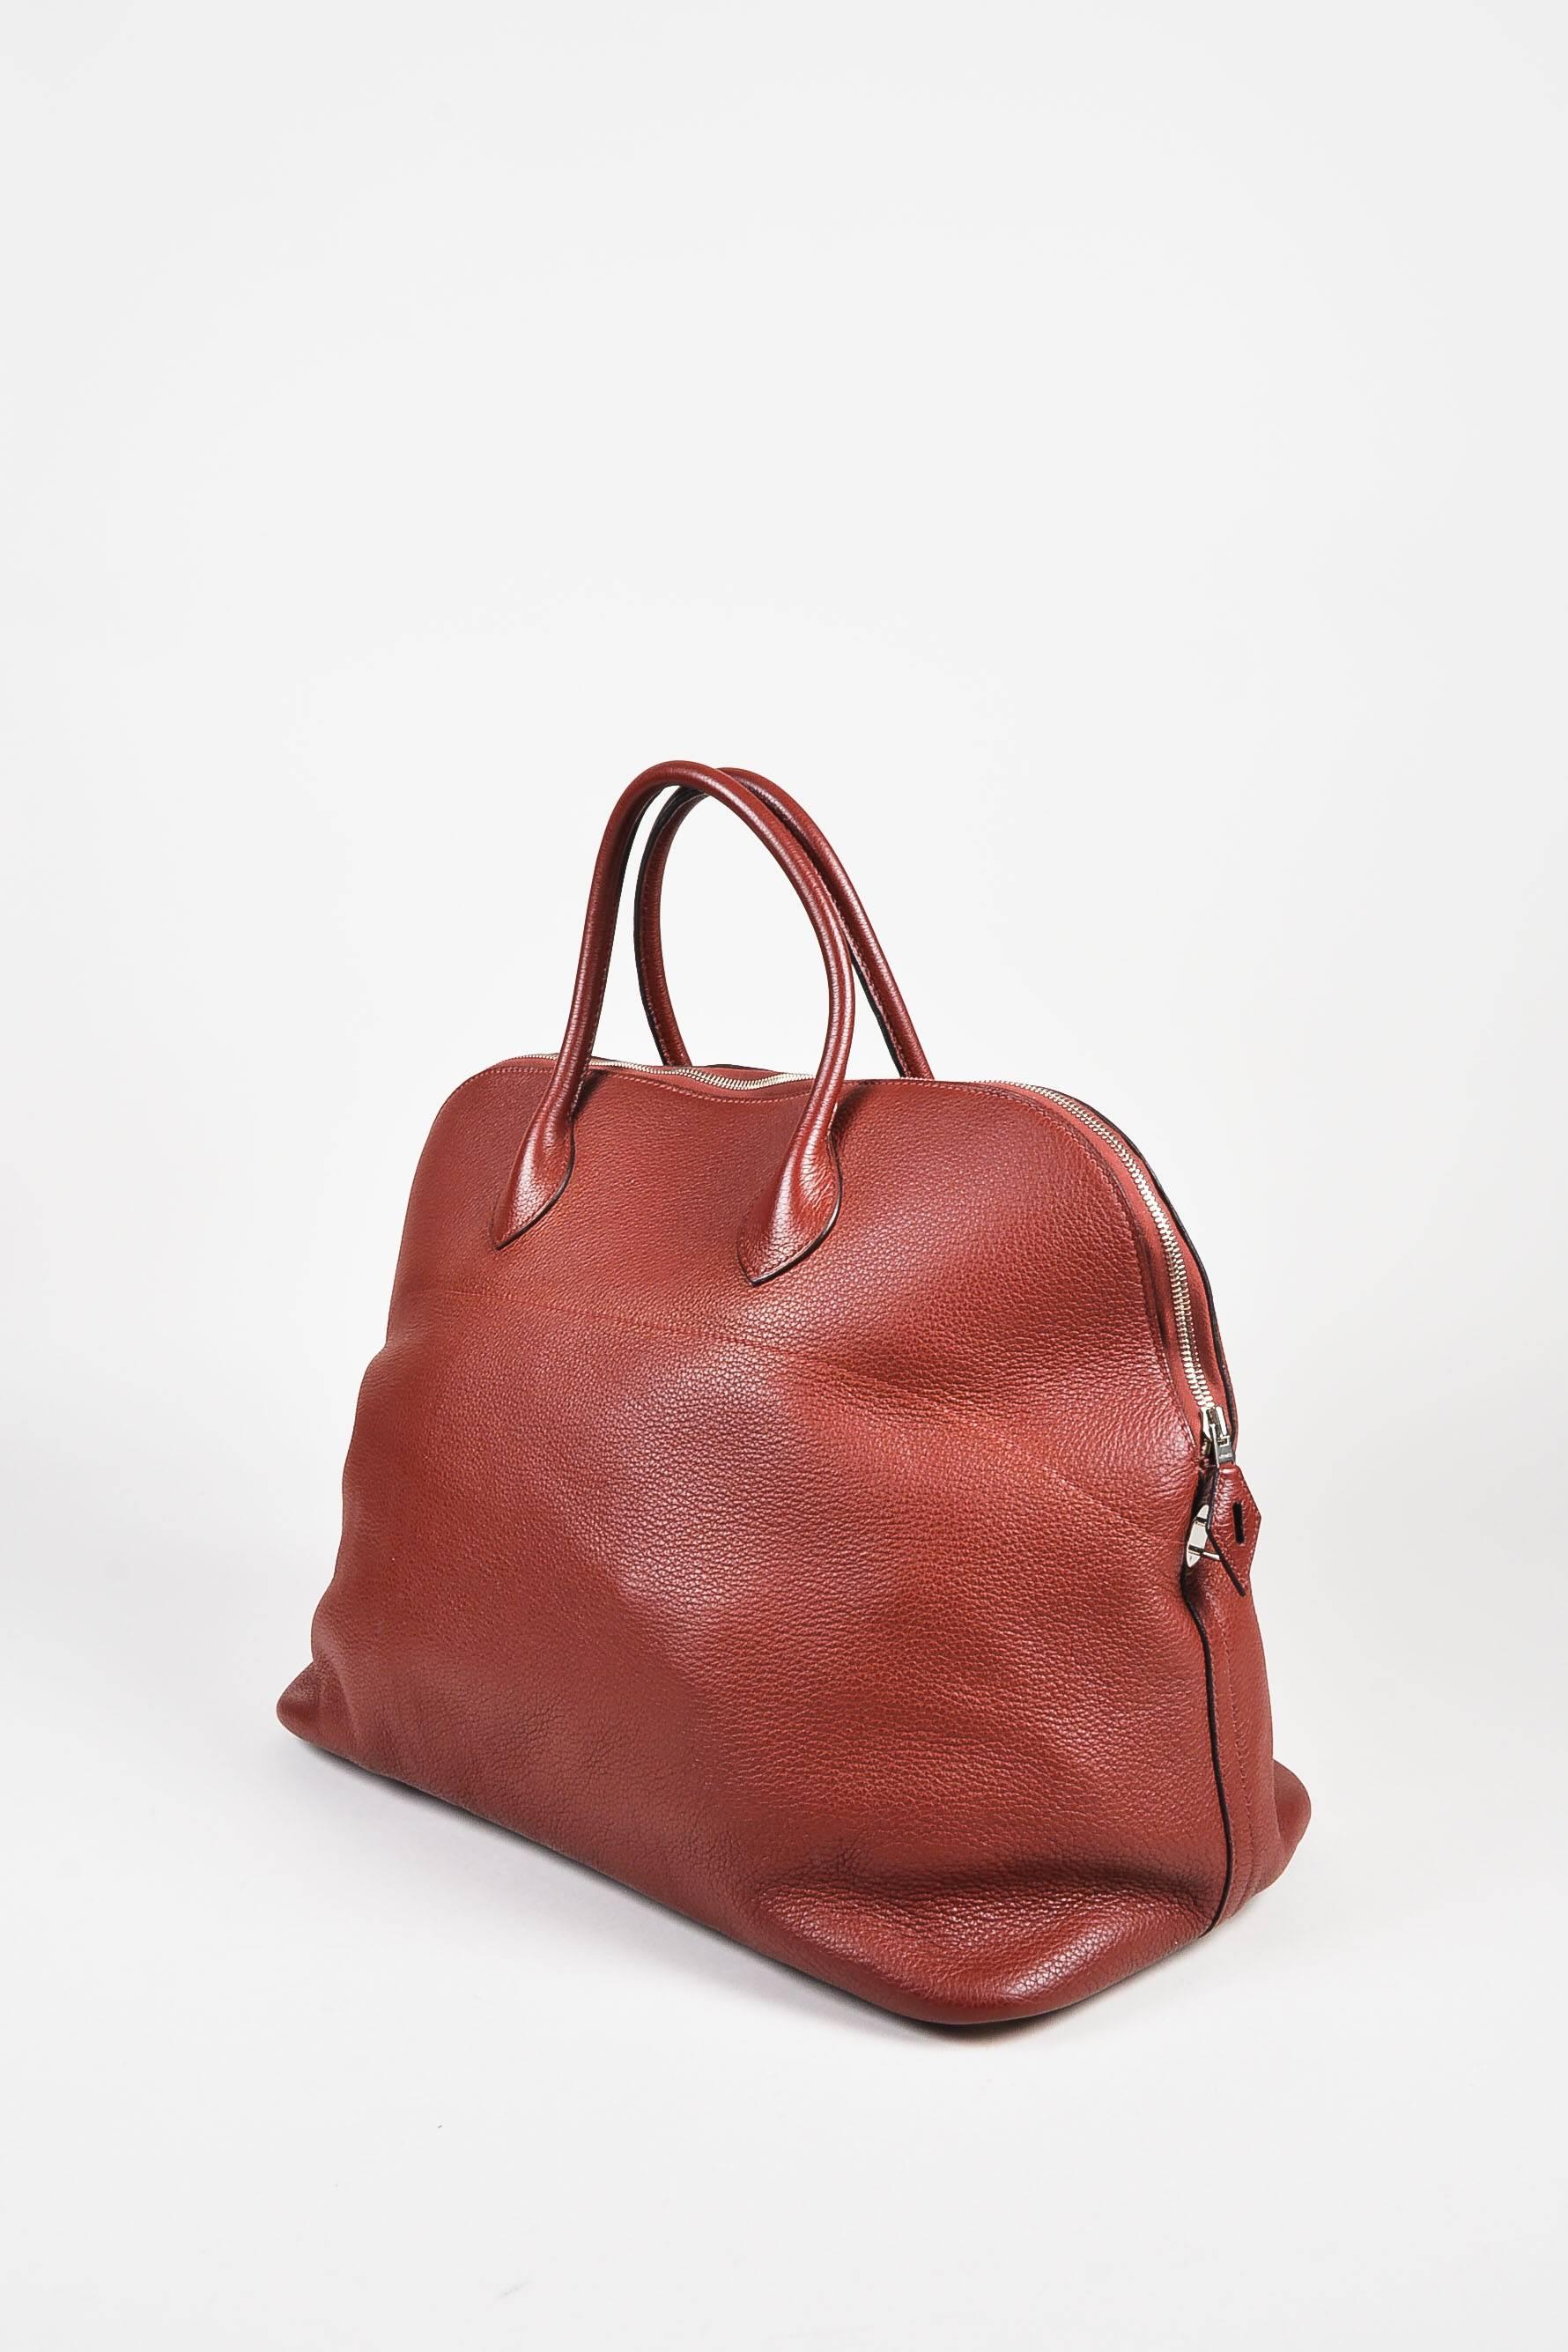 Comes in dust bag. Roomy "Bolide 45" is constructed of Clemence leather in a dark rust red tone. Two rolled top handles and zipper closure. Palladium hardware. Zipper can be secured with lock and keys. Five round feet on bottom help